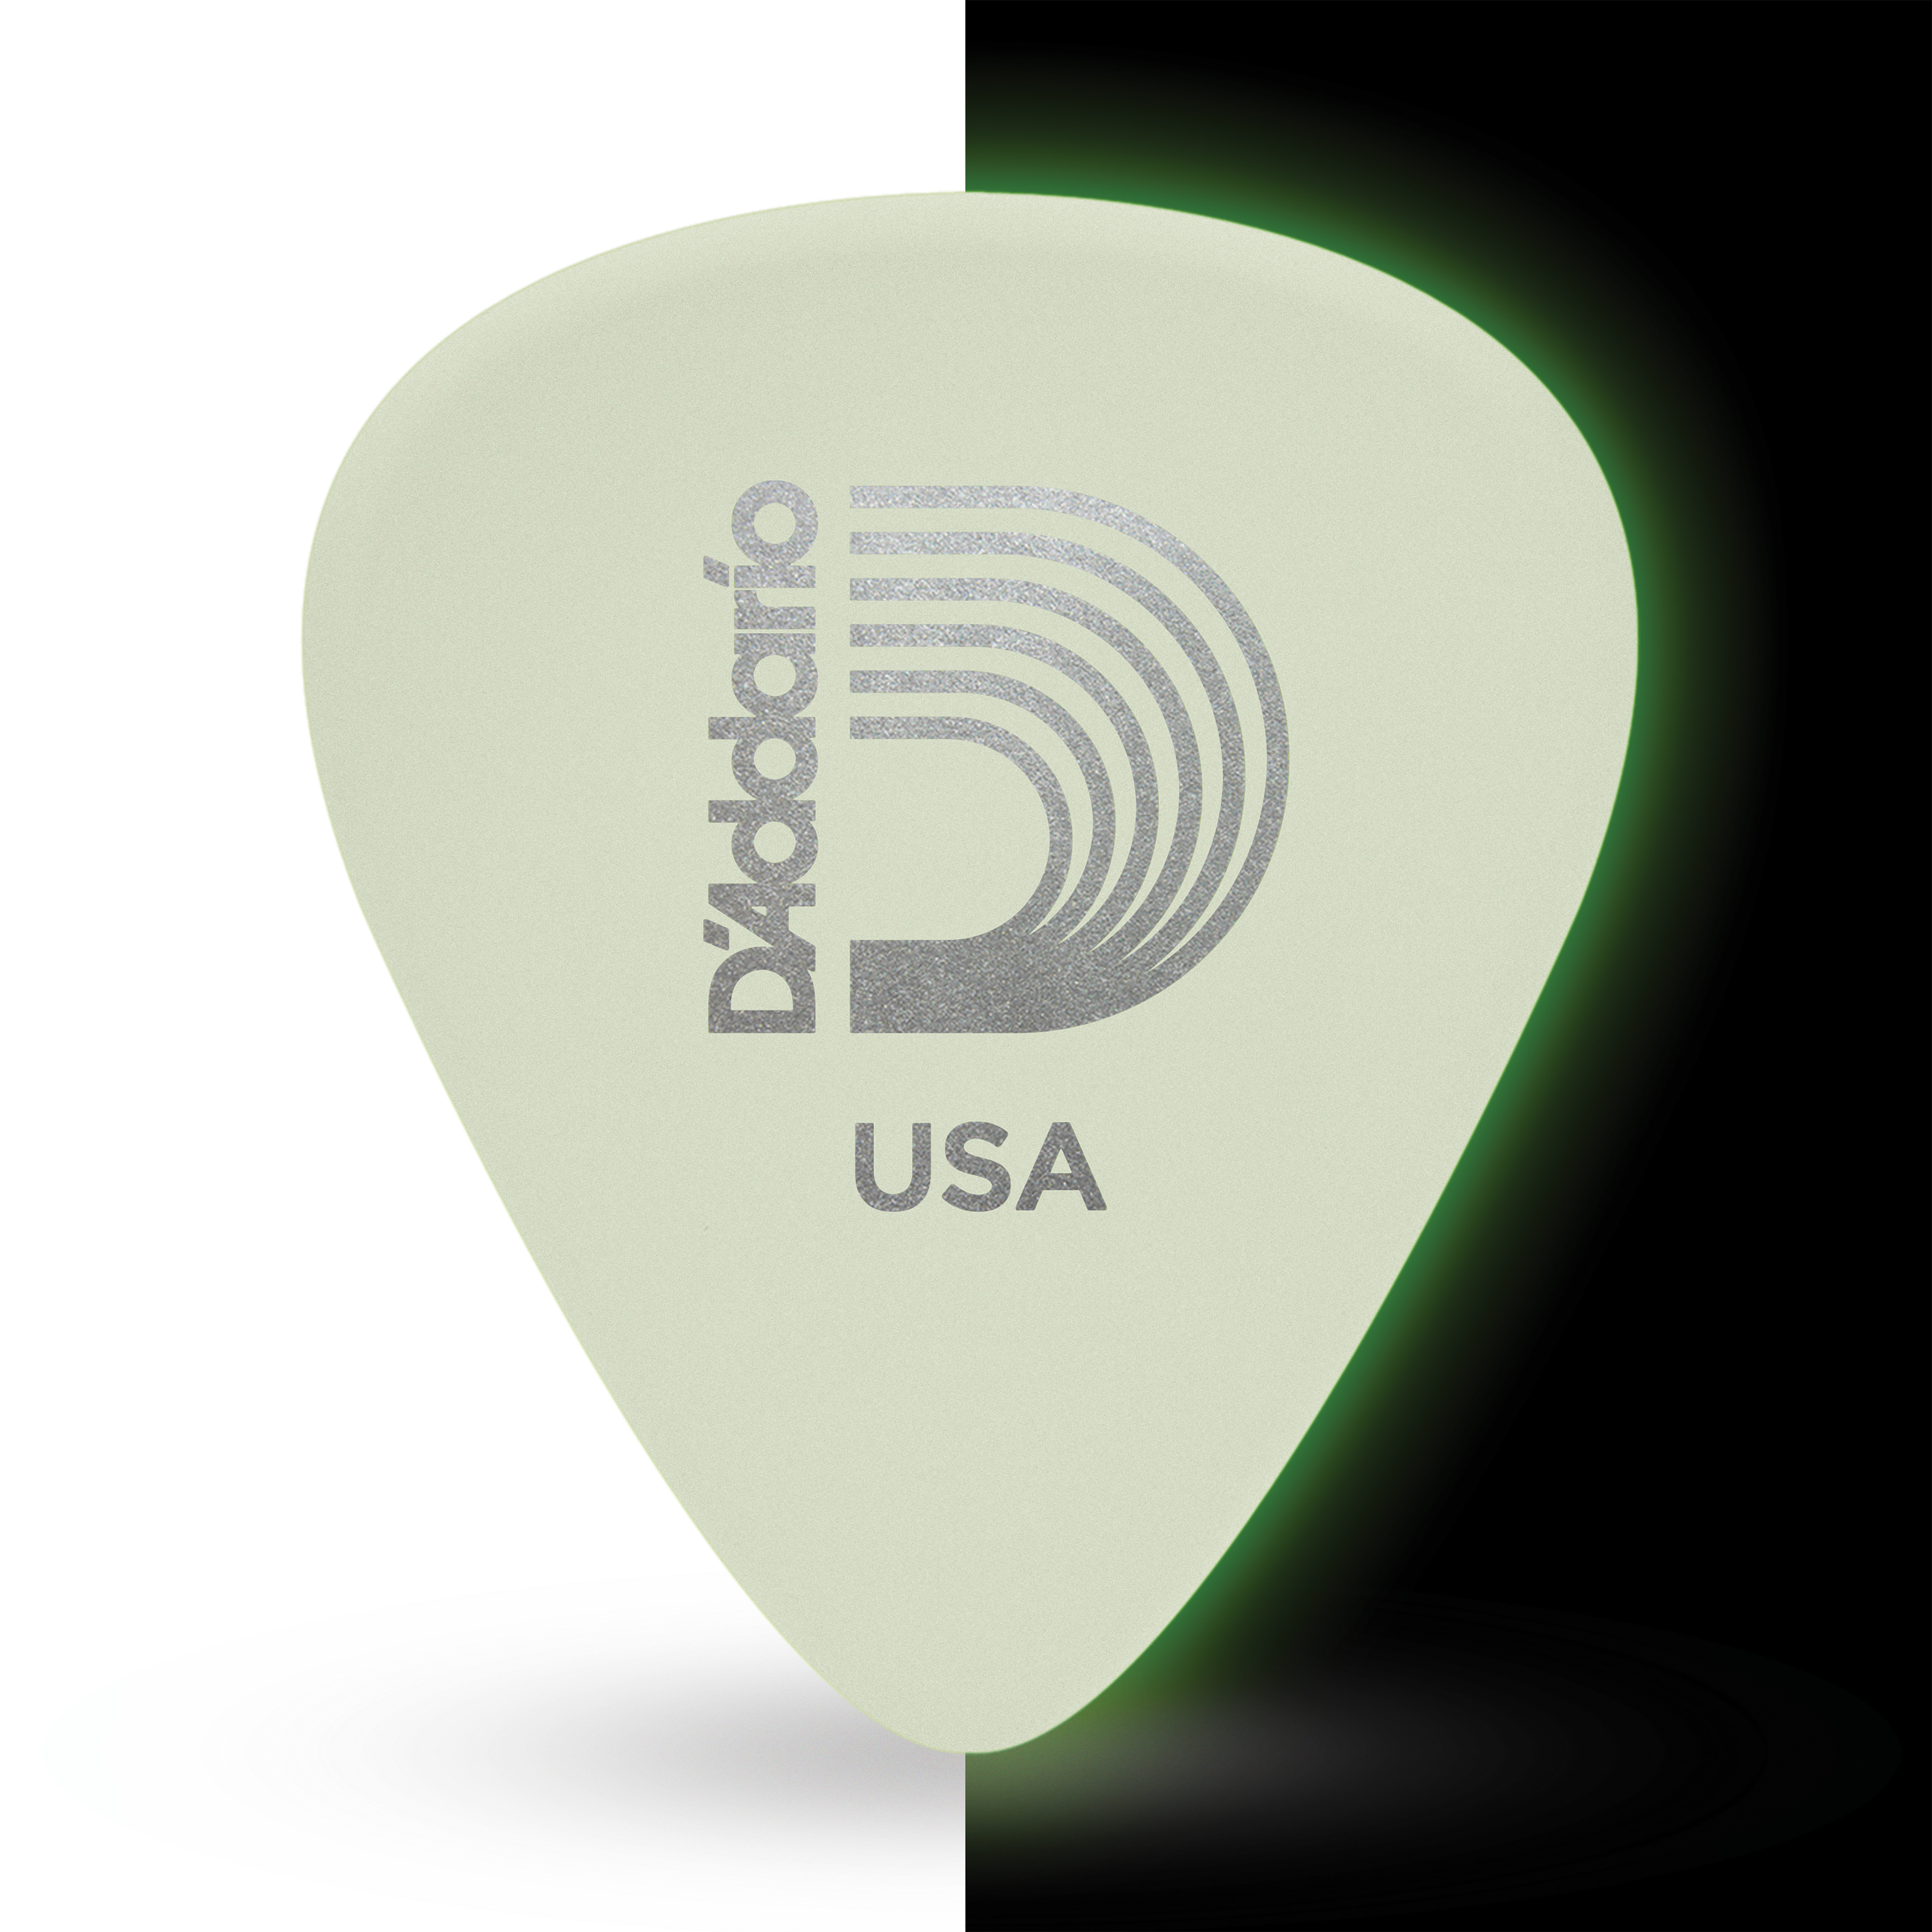 Glow in the Dark Guitar Picks - Don't Lose Your Pick!